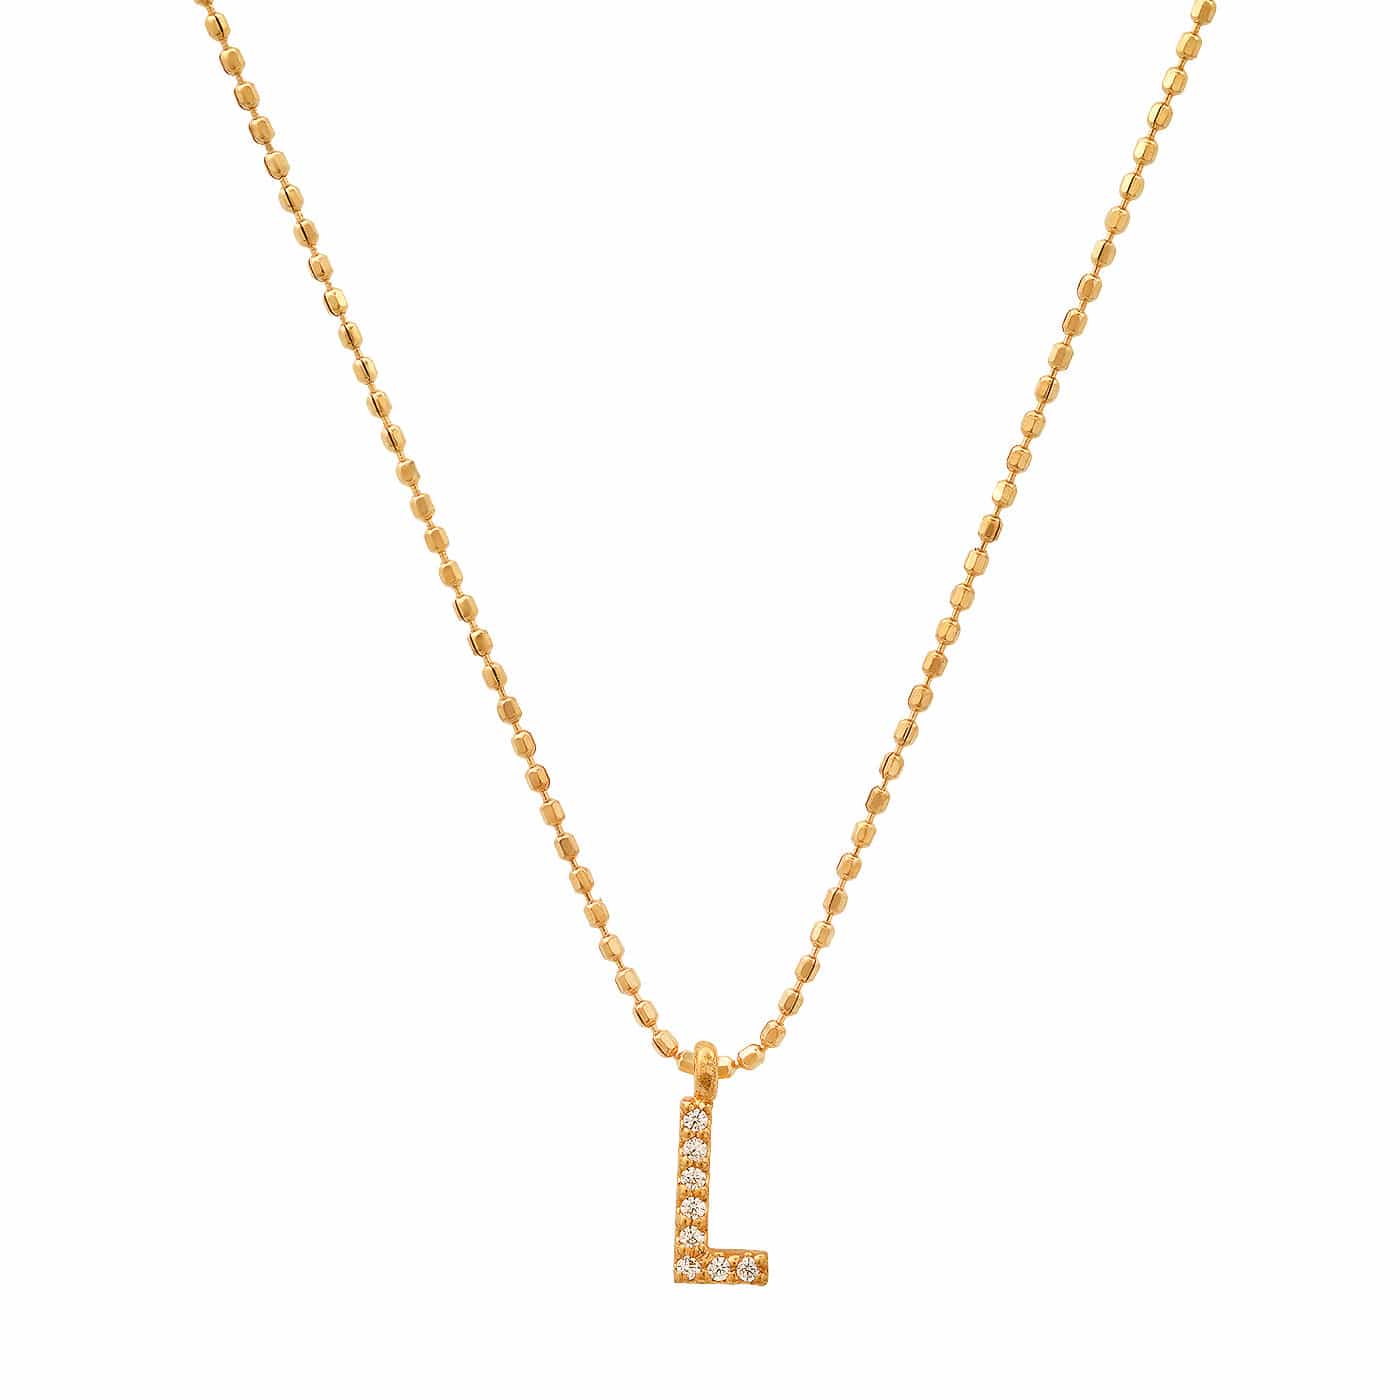 TAI JEWELRY Necklace L Pave Initial Ball Chain Necklace